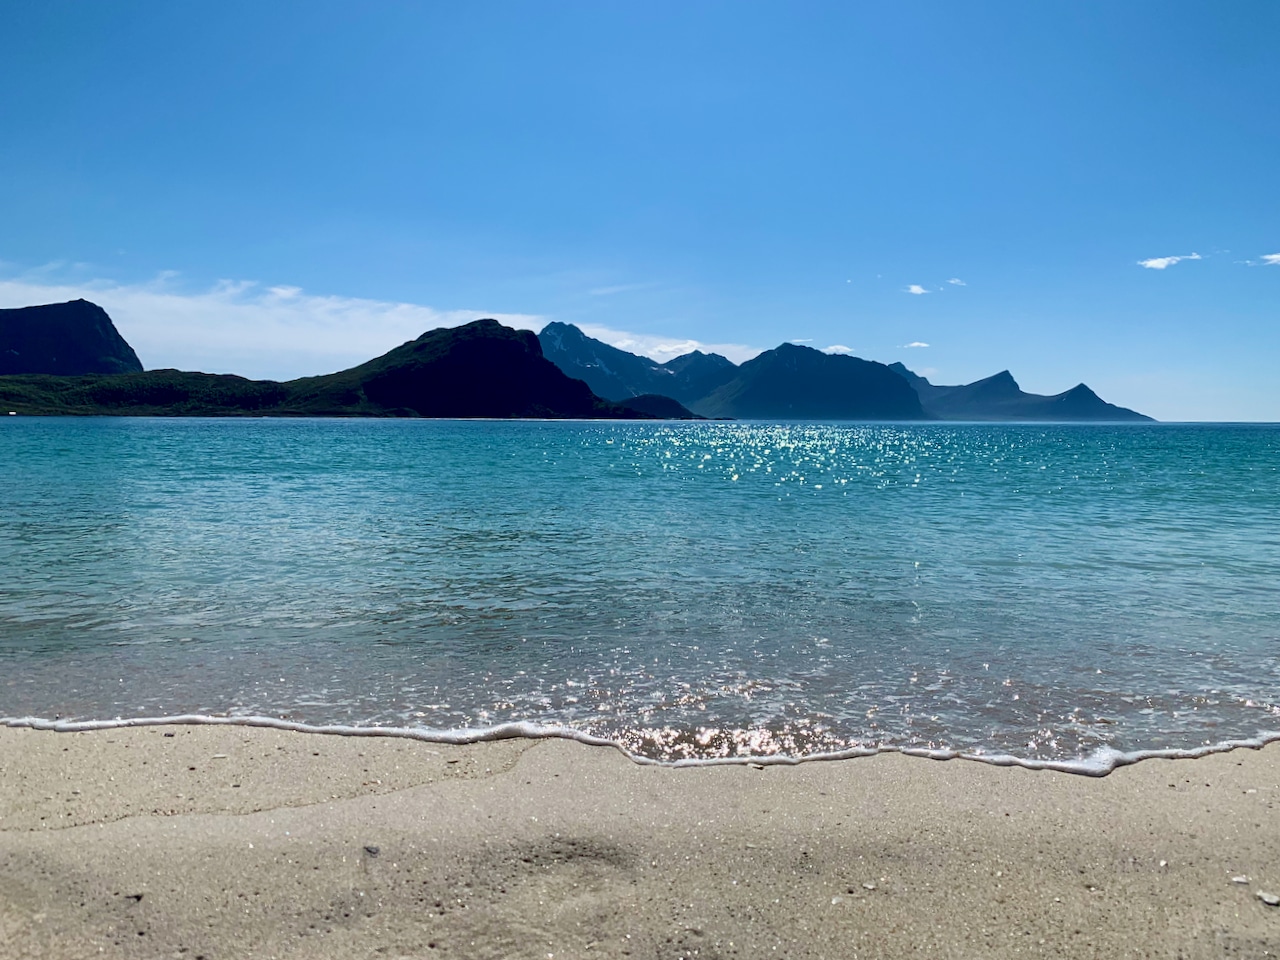 HAUKLANDSTRANDA (Norwegian Scenic Route Lofoten): The water is crystal clear but swimming may not be ideal for everyone due to the chilly water temperature.